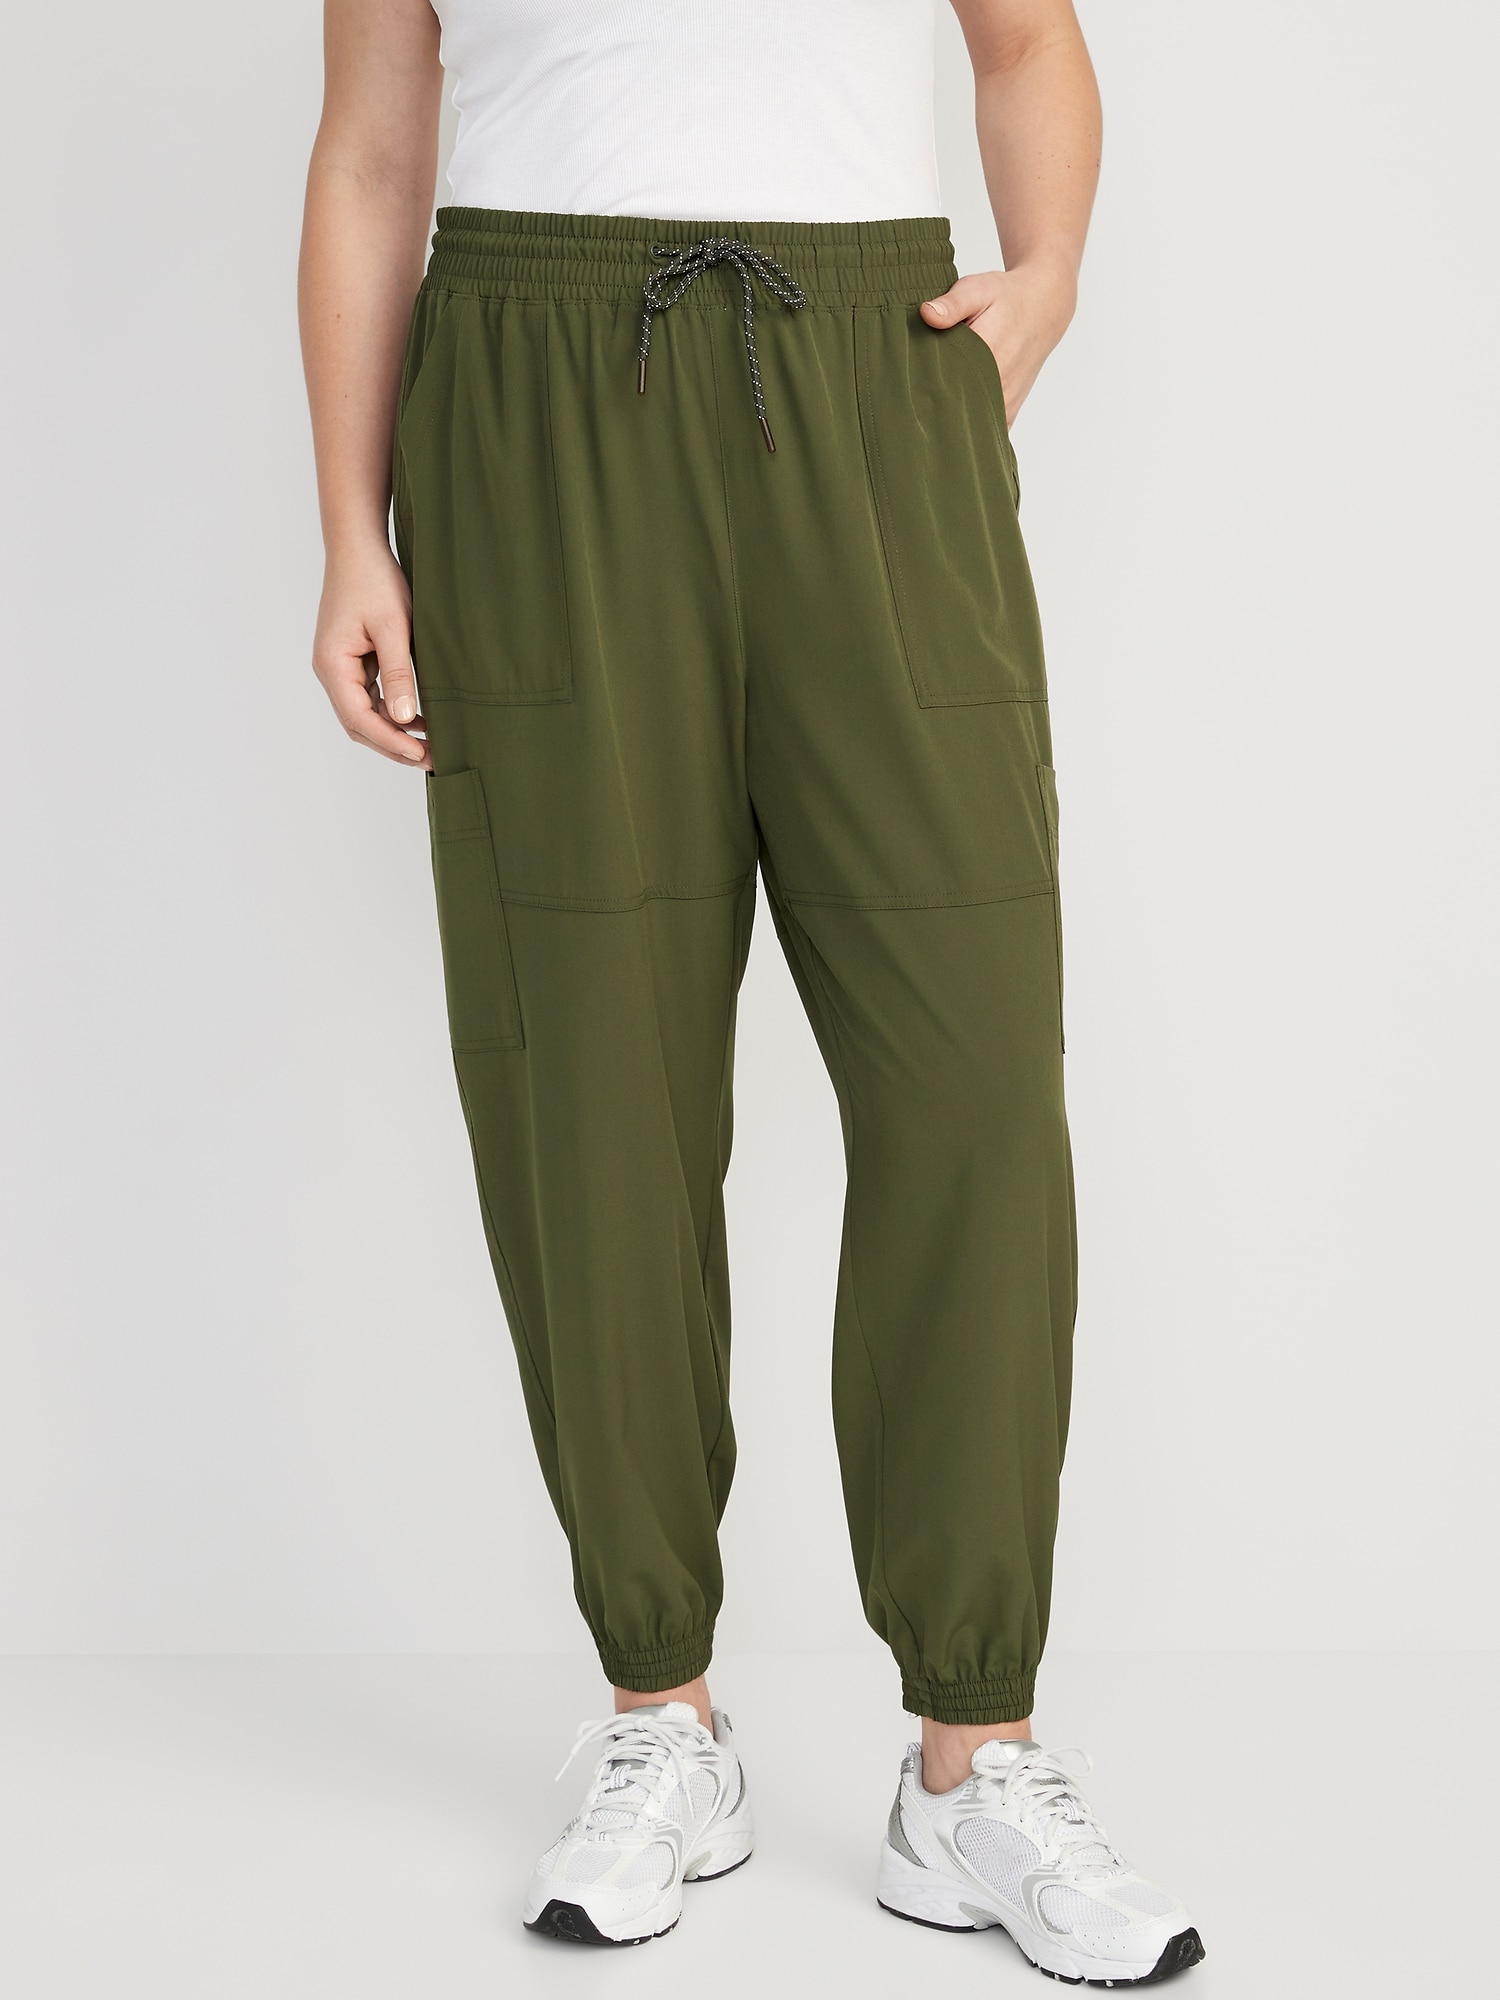 Extra Cargo Jogger Pants for Women Old Navy